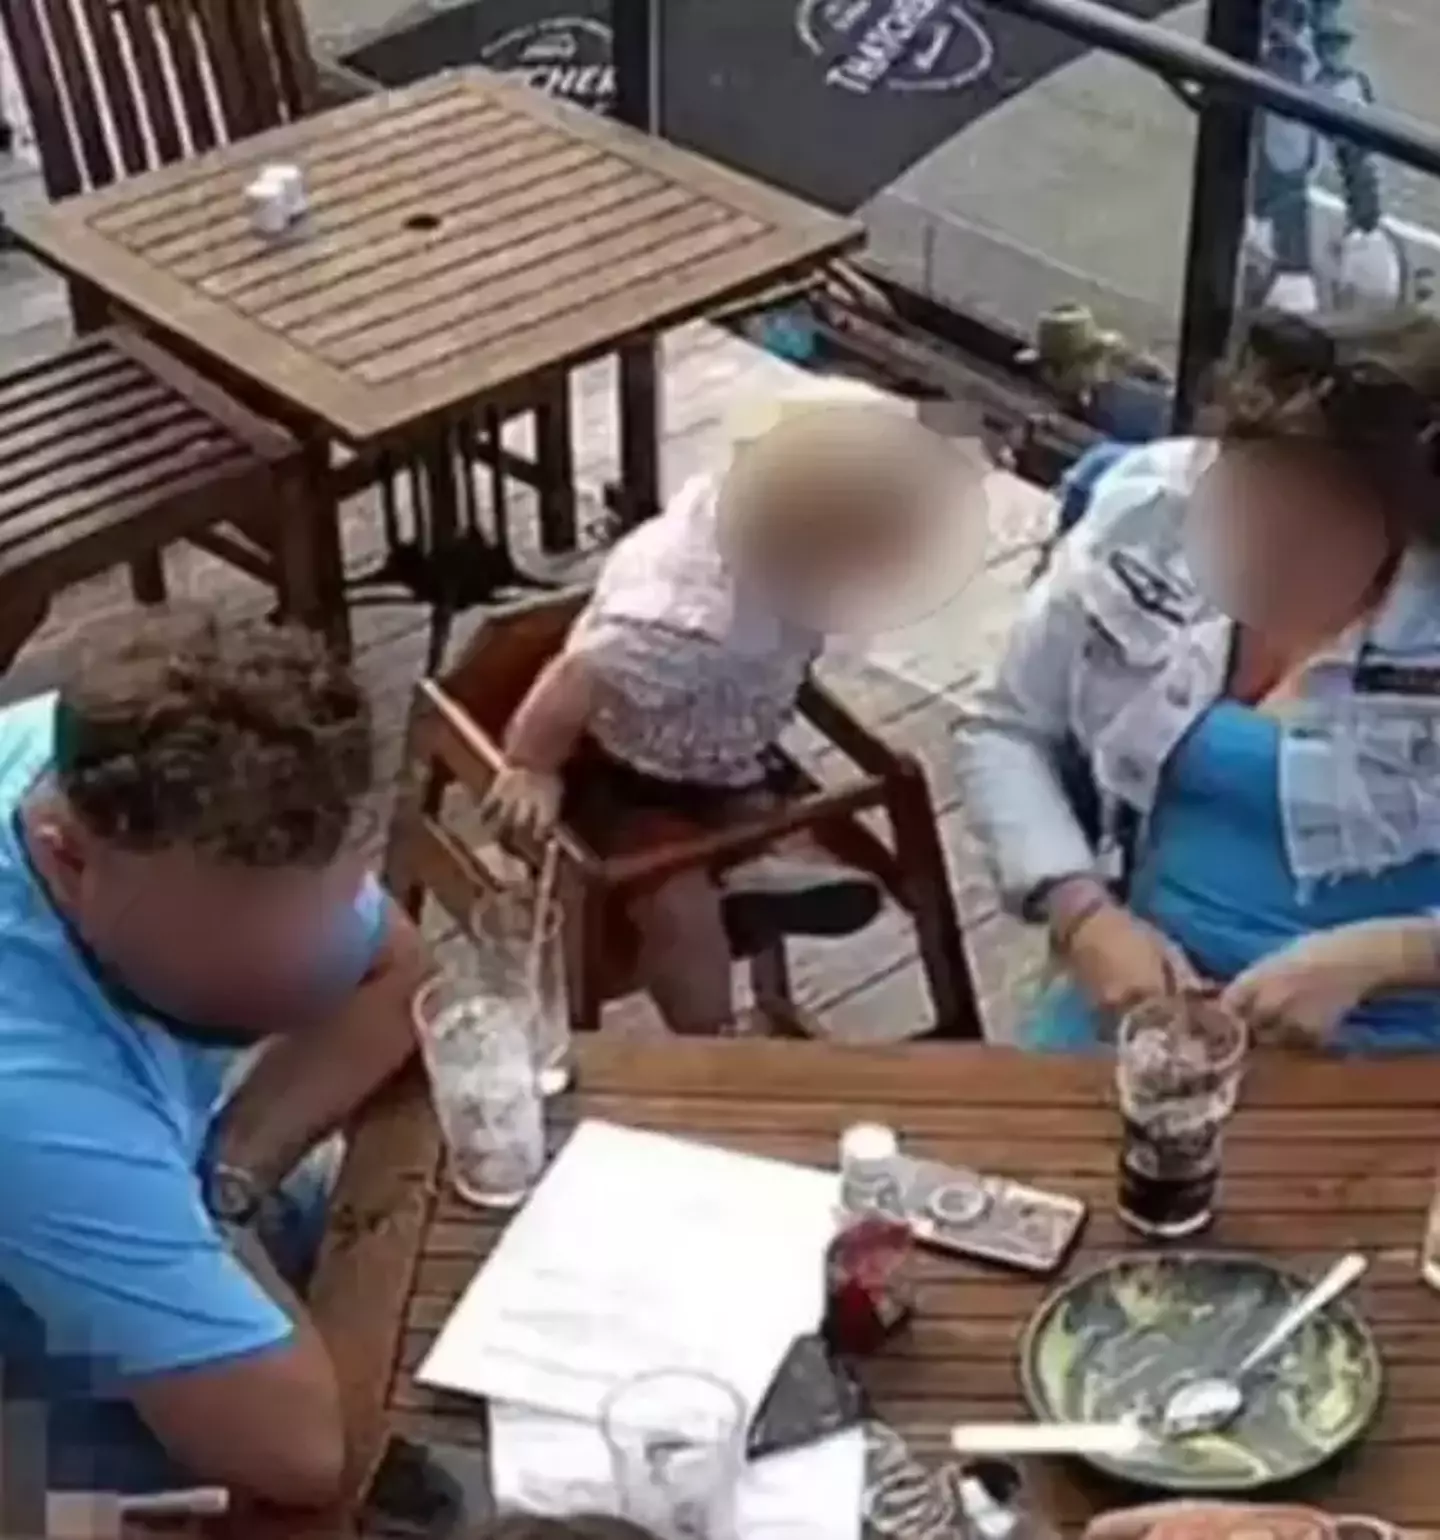 The restaurant accused the family of walking out without paying.